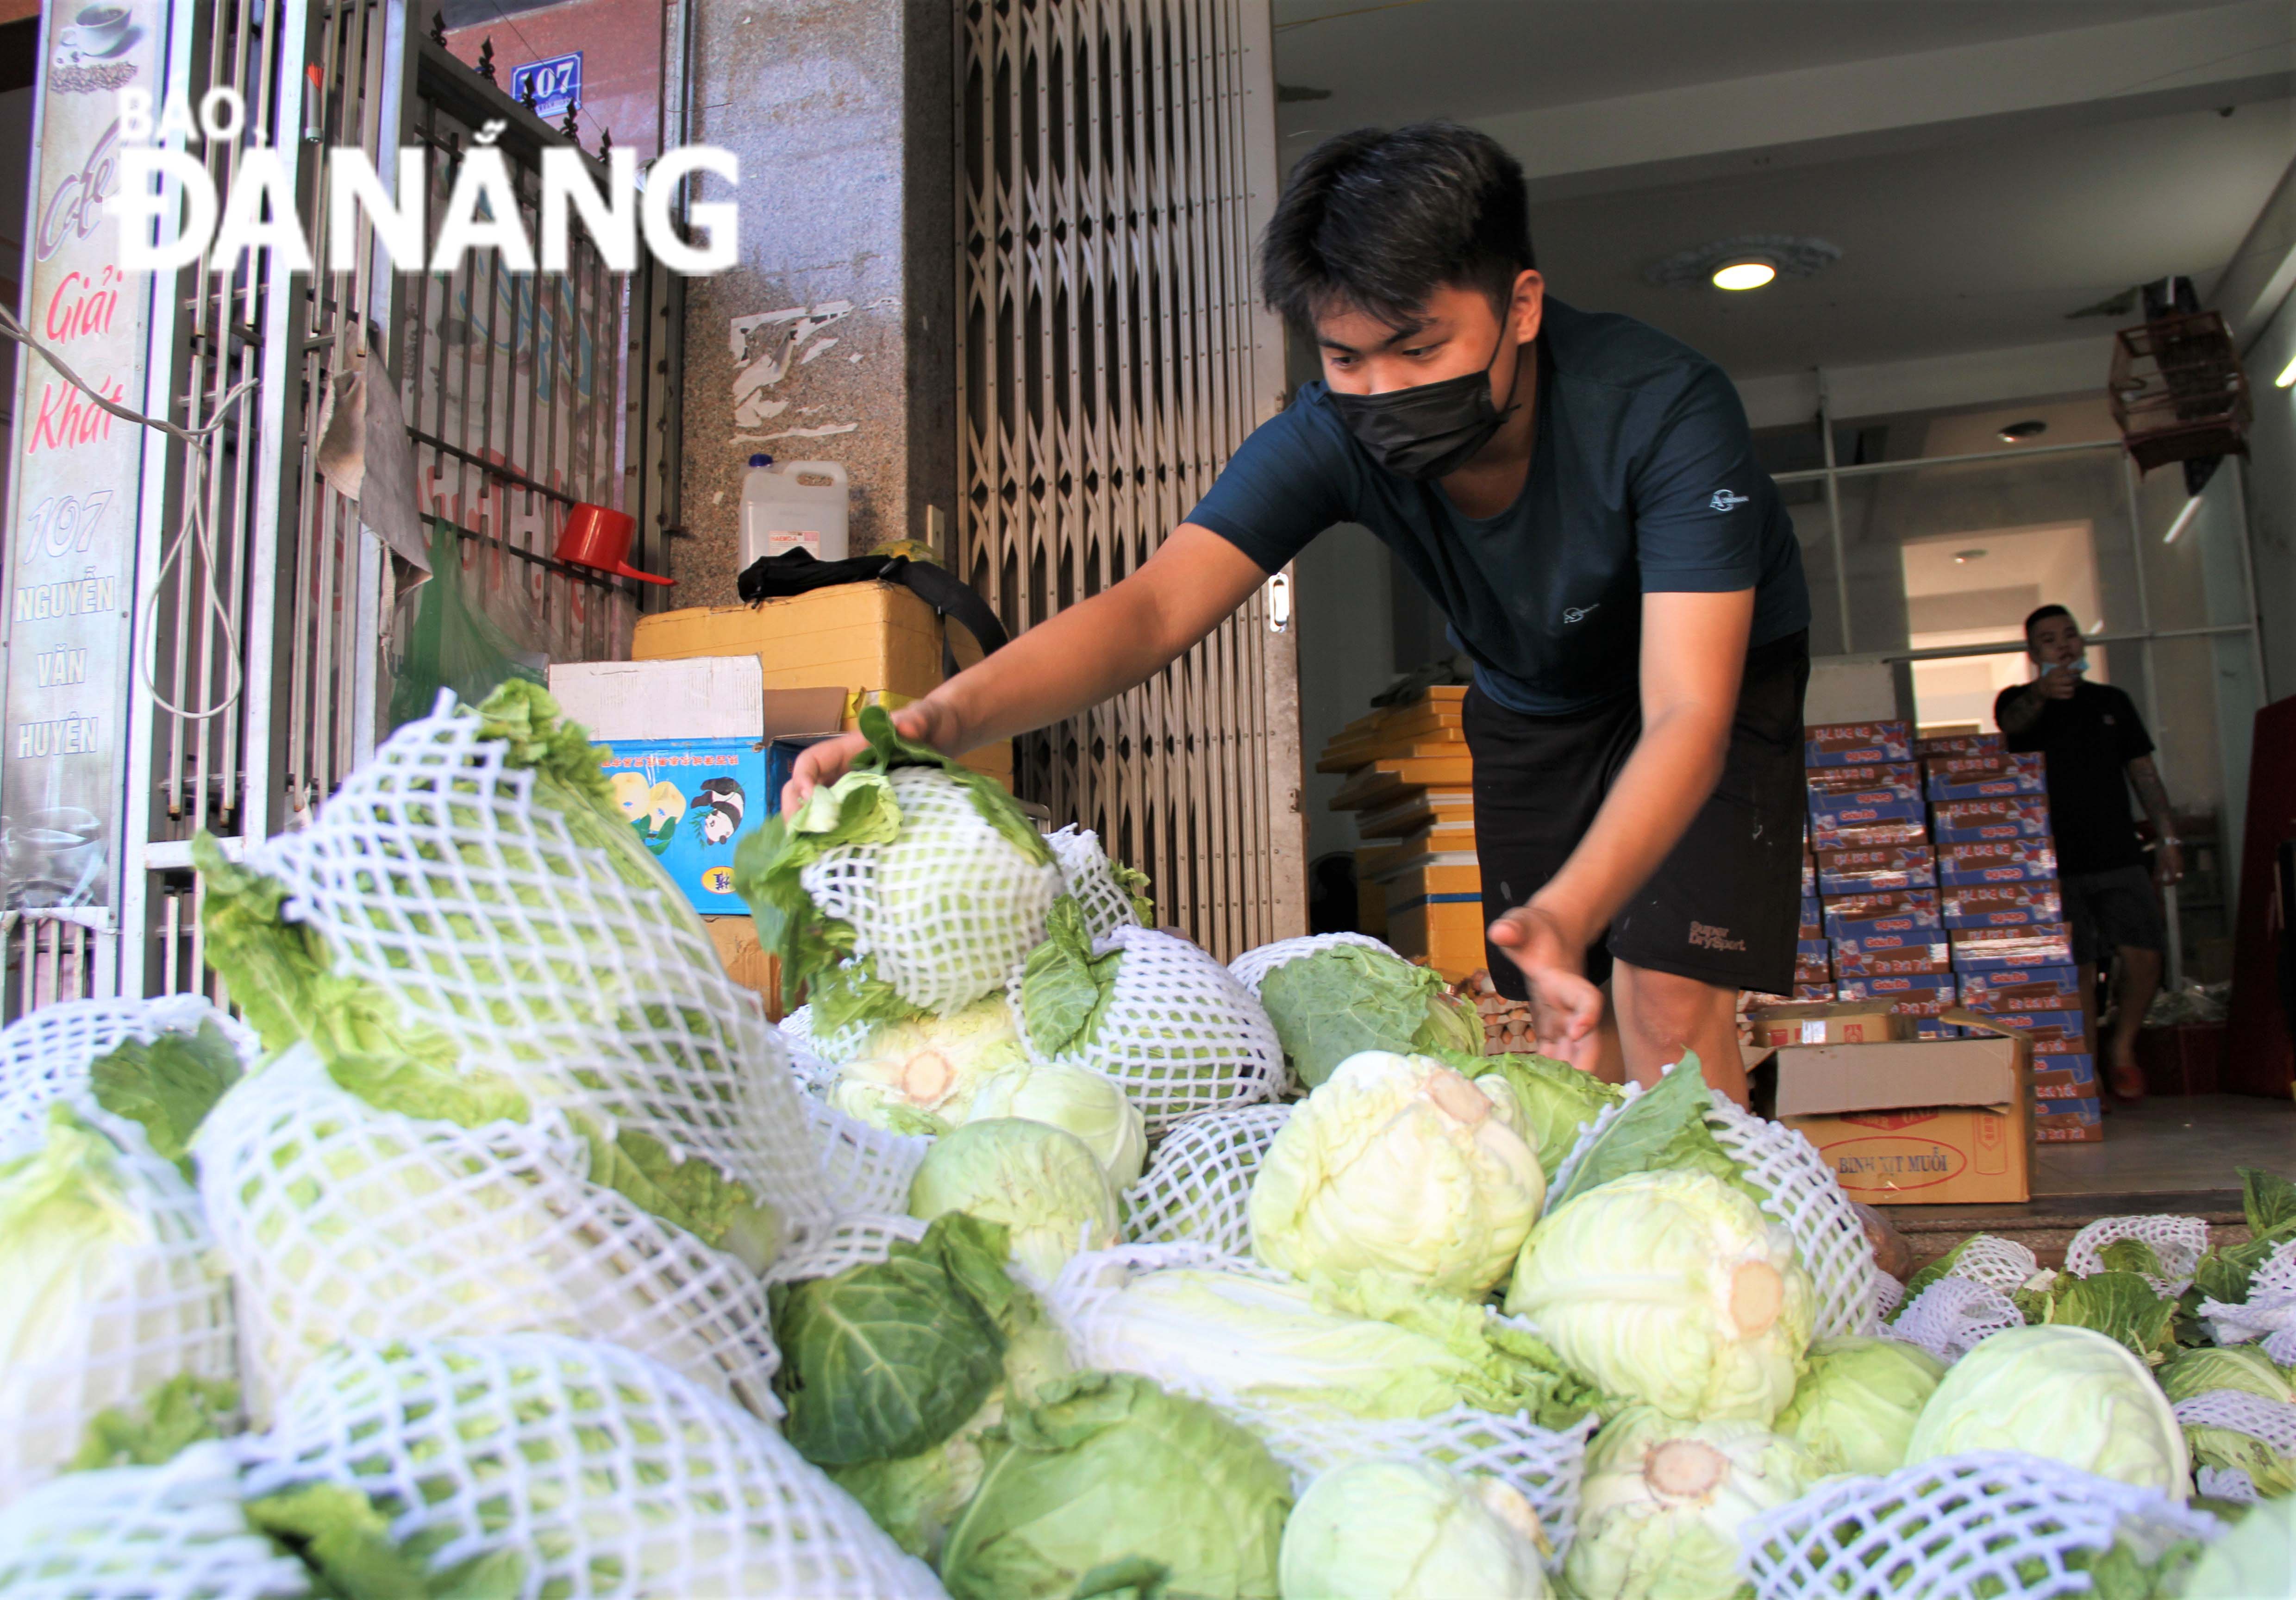 Every day, a large number of fruit, vegetables, instant noodles and canned food donated by the general public for Ho Chi Minh City are mobilised at a collection point set at 109 Nguyen Van Huyen in Cam Le District.